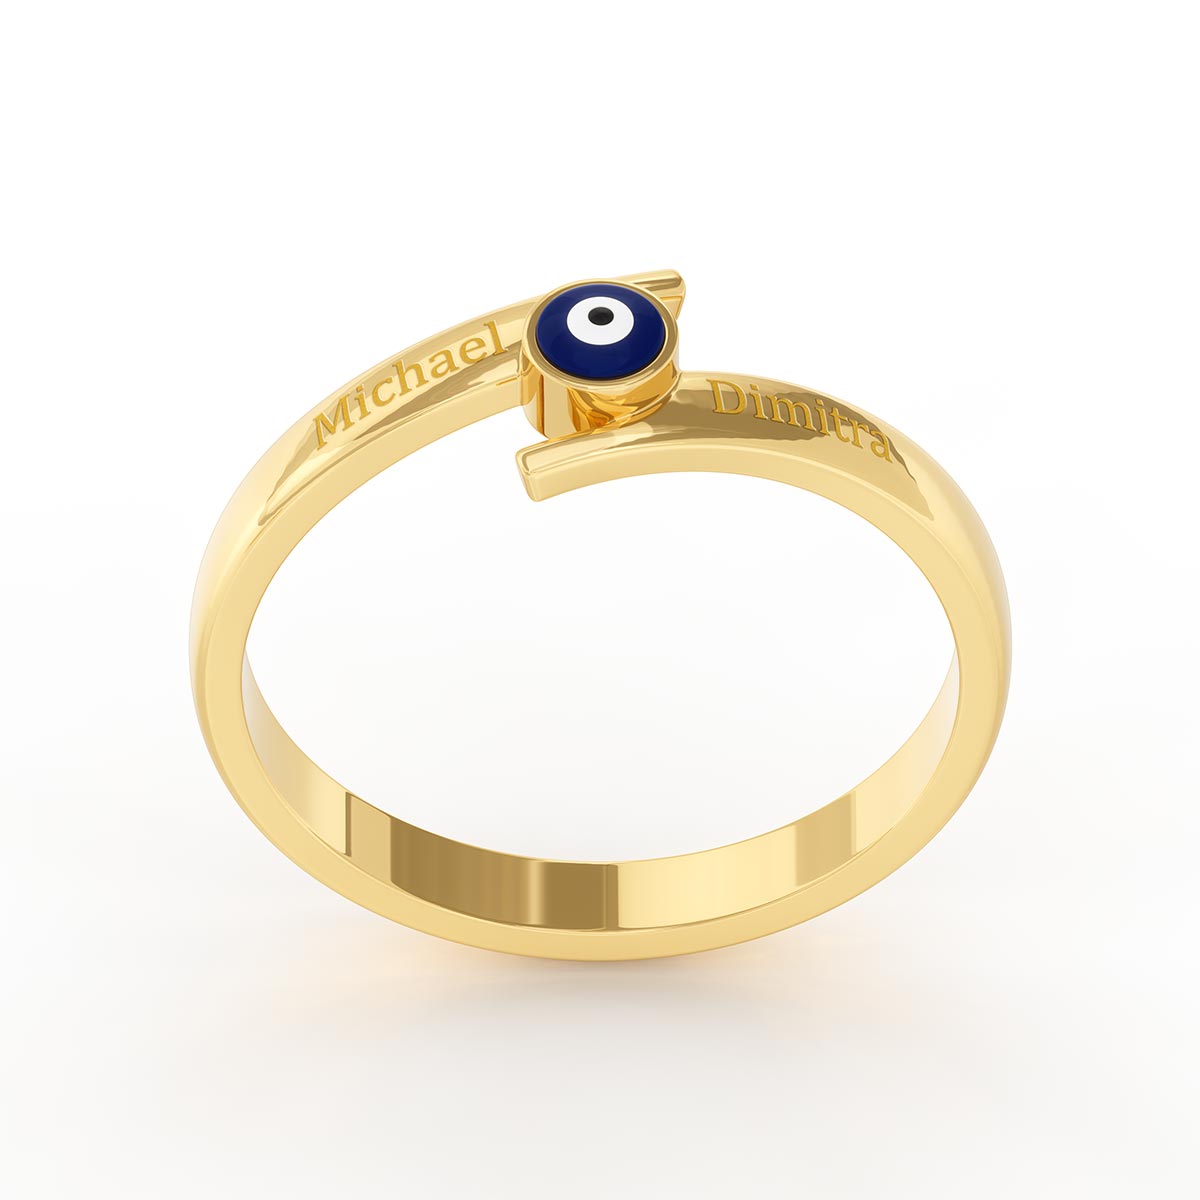 Evil Eye Bypass Ring with Personalized Engravings